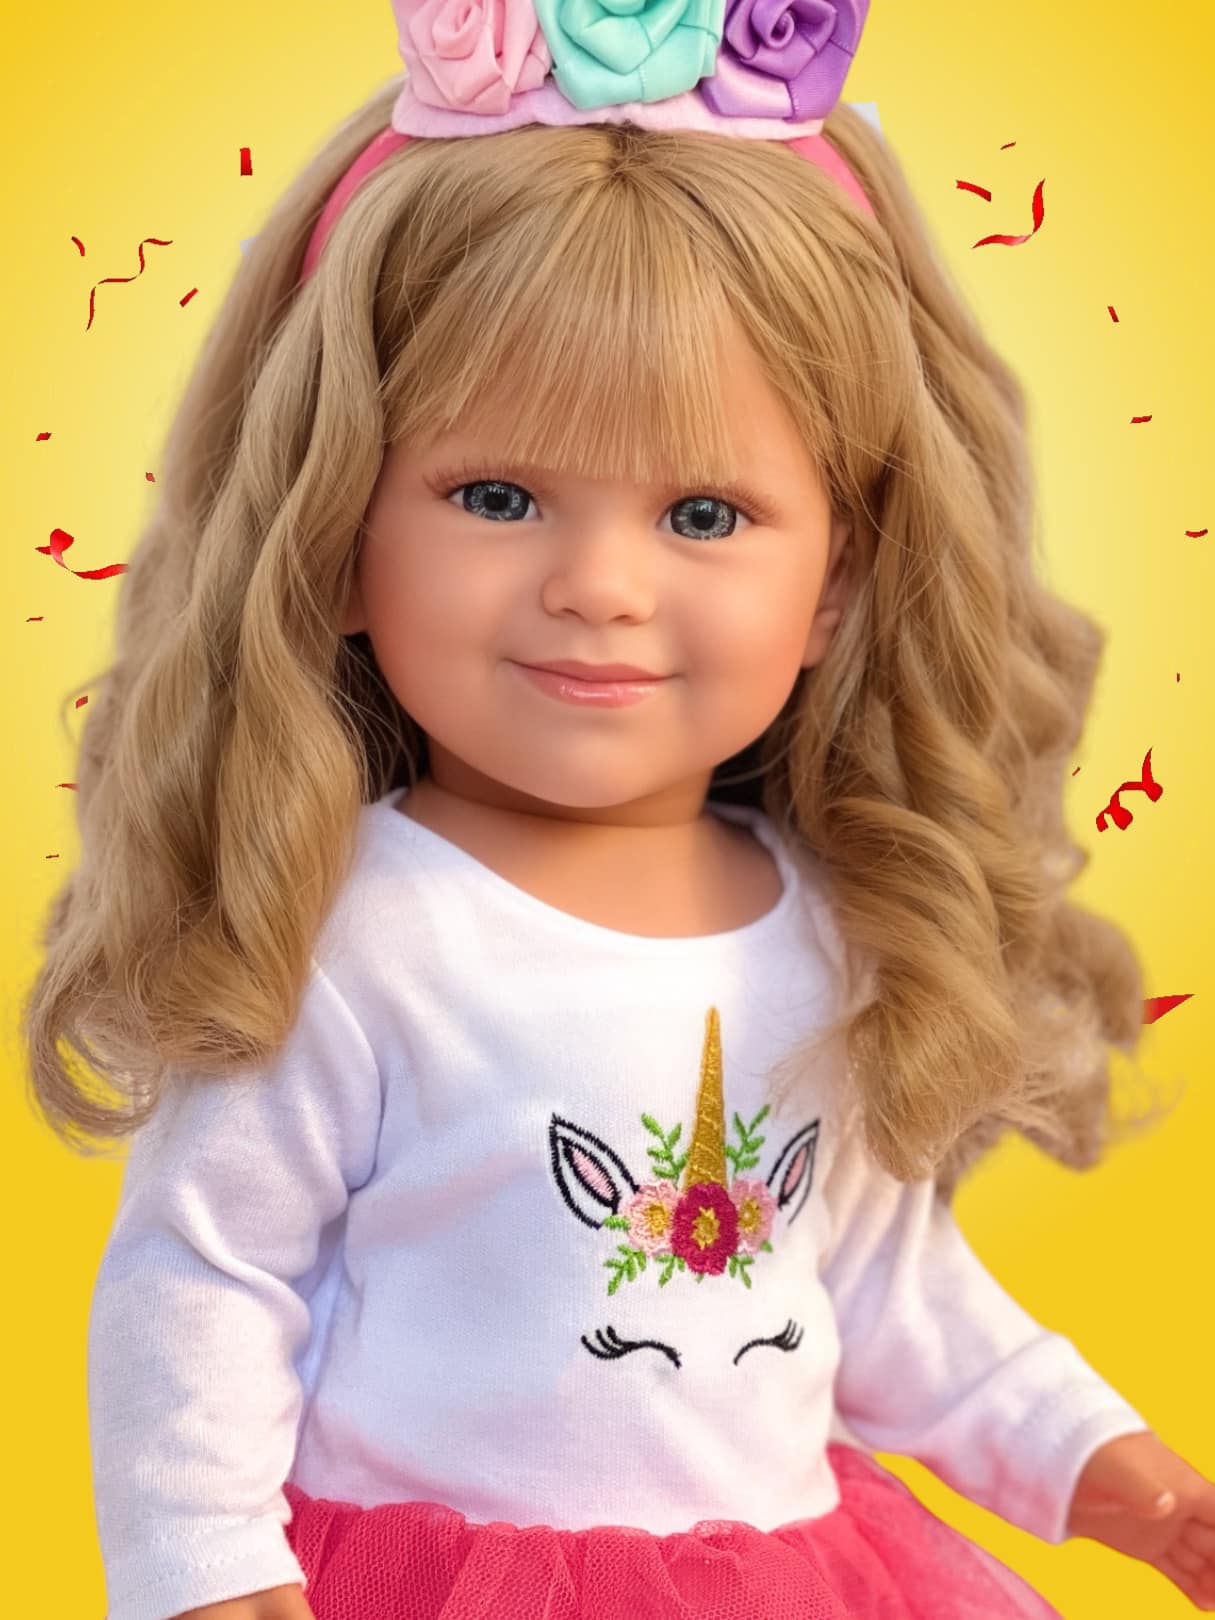 Adorable Pink Unicorn Costume for 18 Inch Kennedy and Friends Dolls - Perfect for Imaginative Play